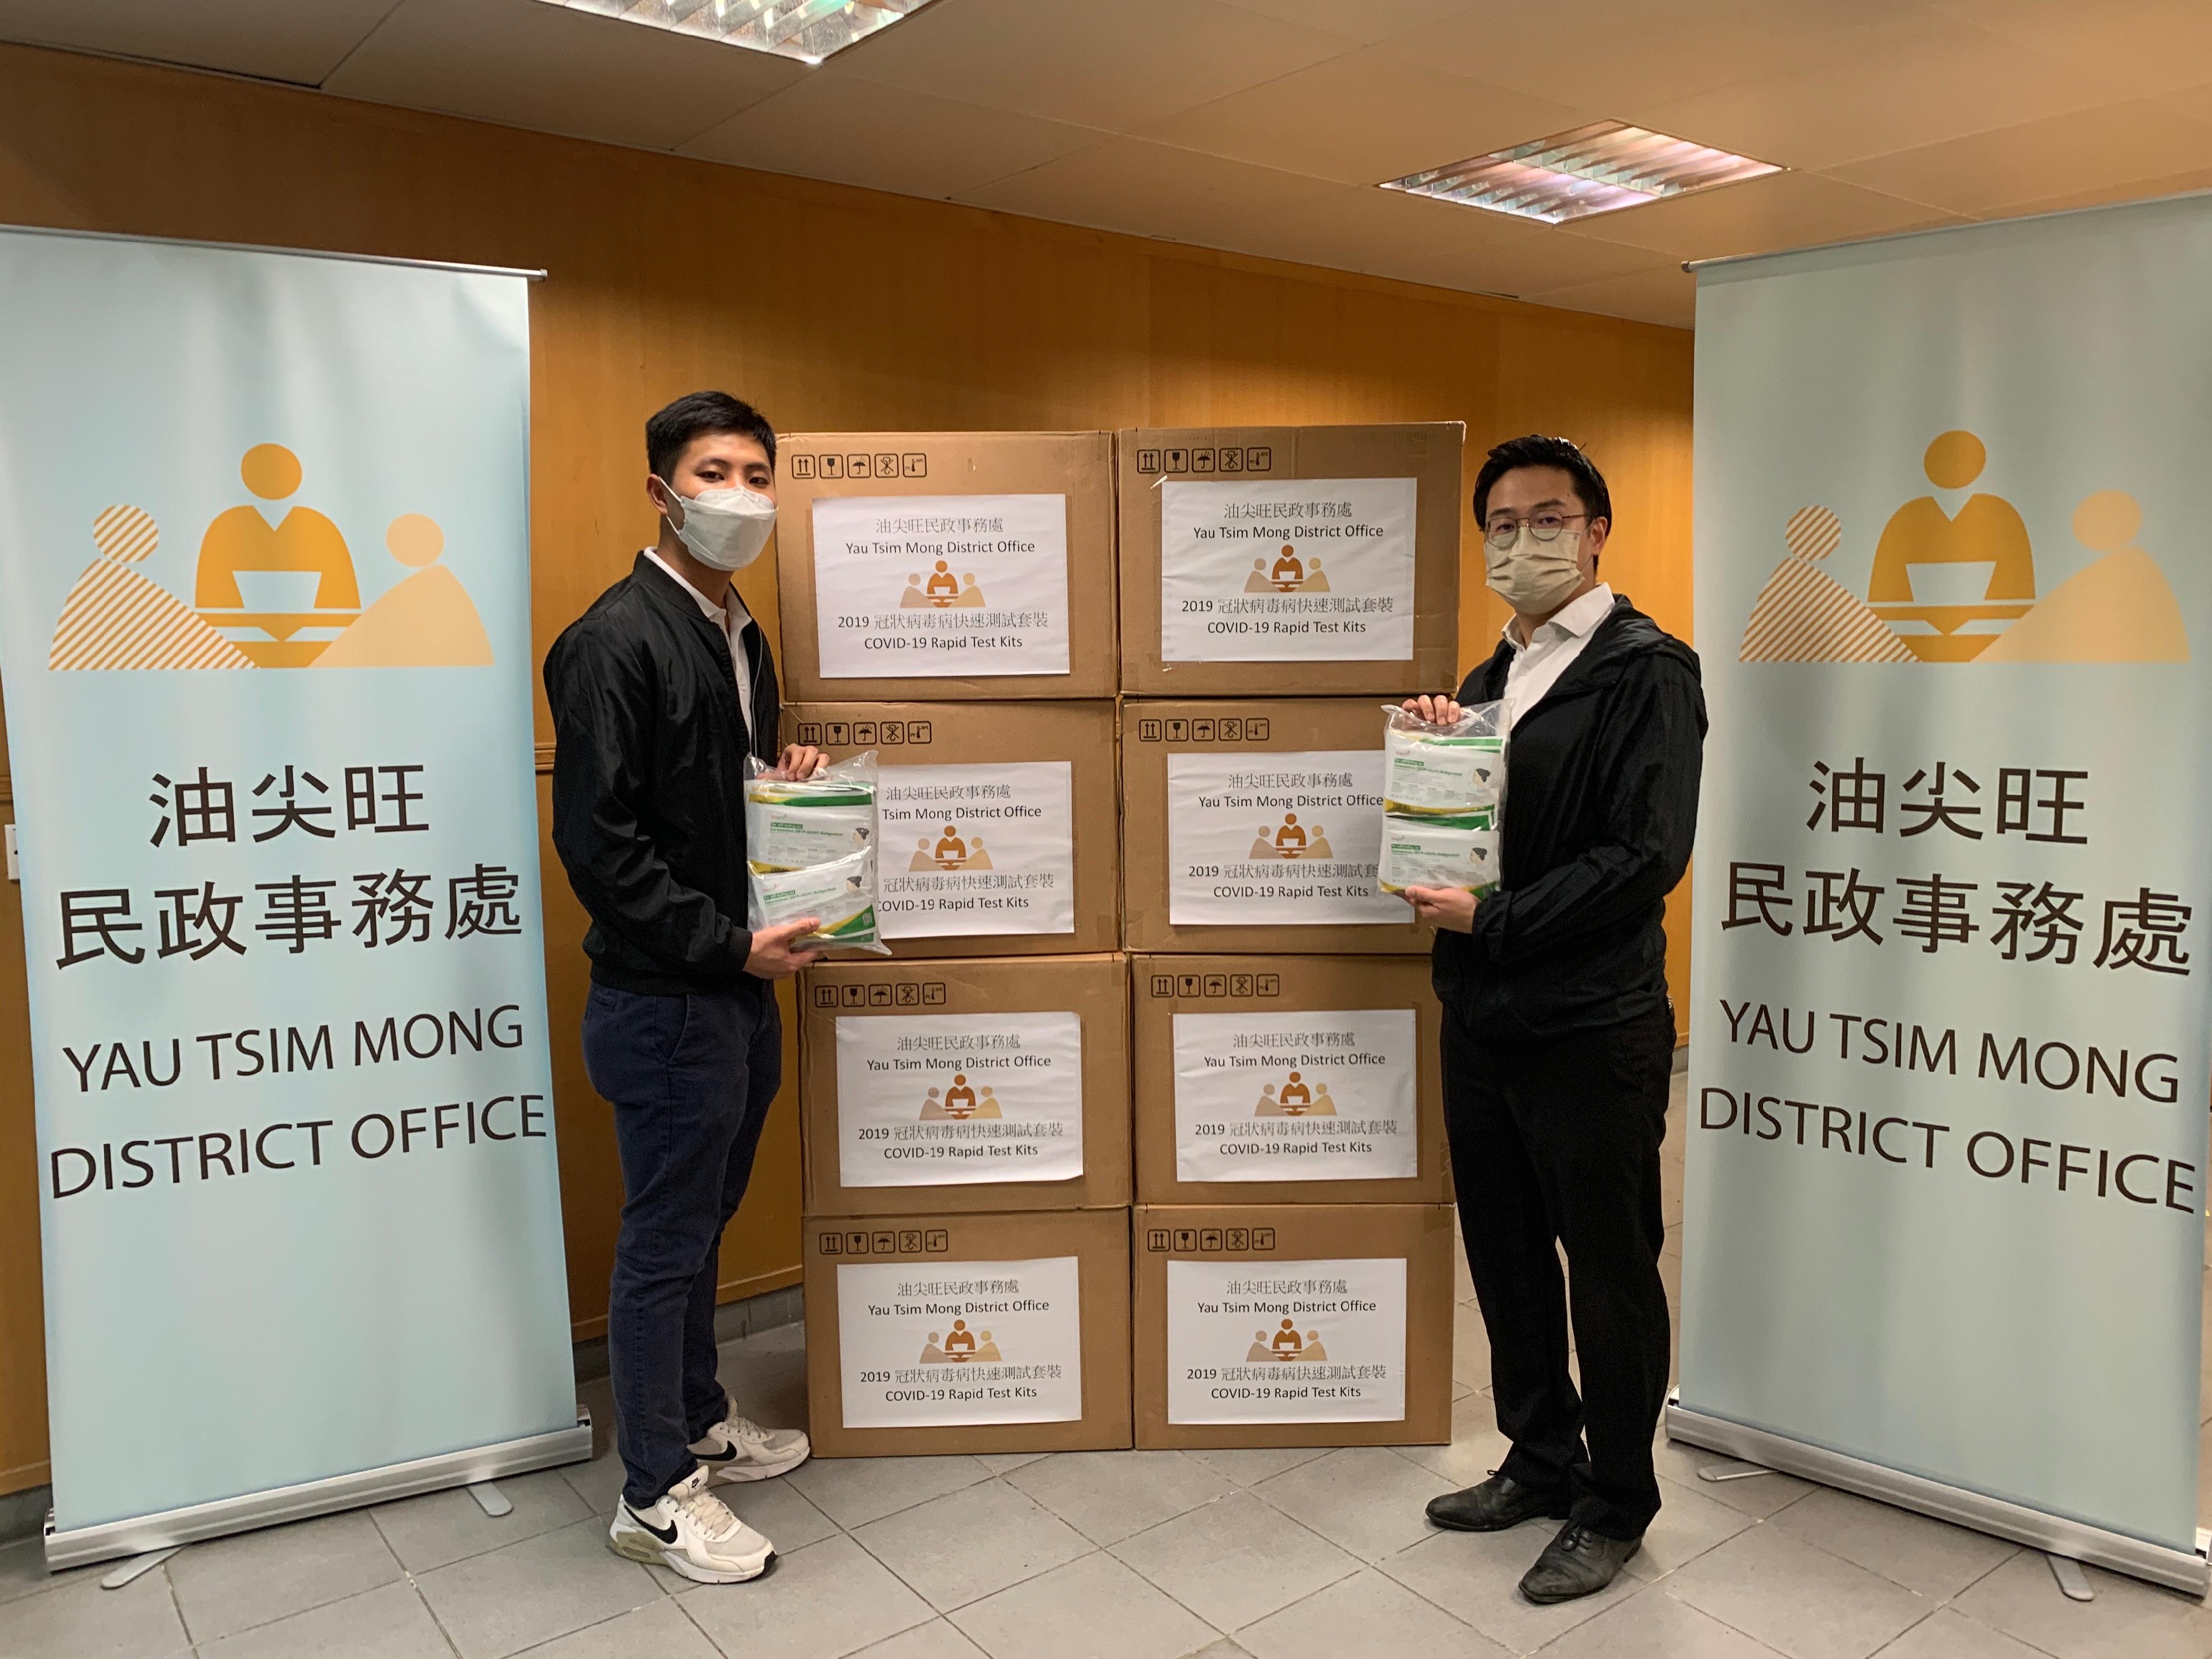 The Yau Tsim Mong District Office today (May 3) distributed COVID-19 rapid test kits to households, cleansing workers and property management staff living and working in Hankow Centre for voluntary testing through the property management company.